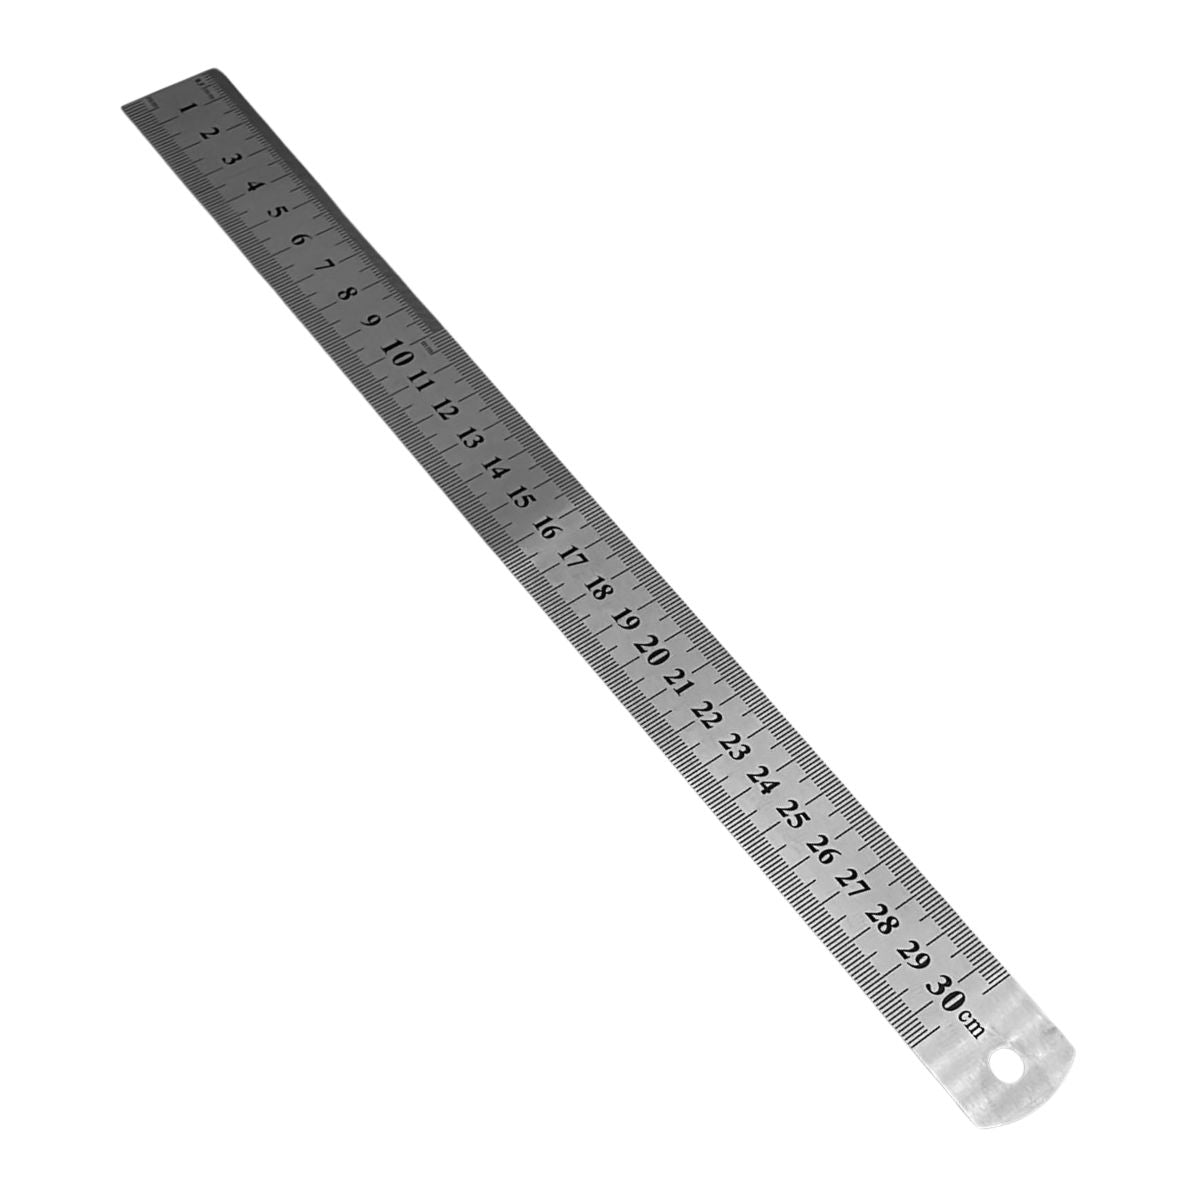 RULER 30CM STAINLESS STEEL - South East Clearance Centre